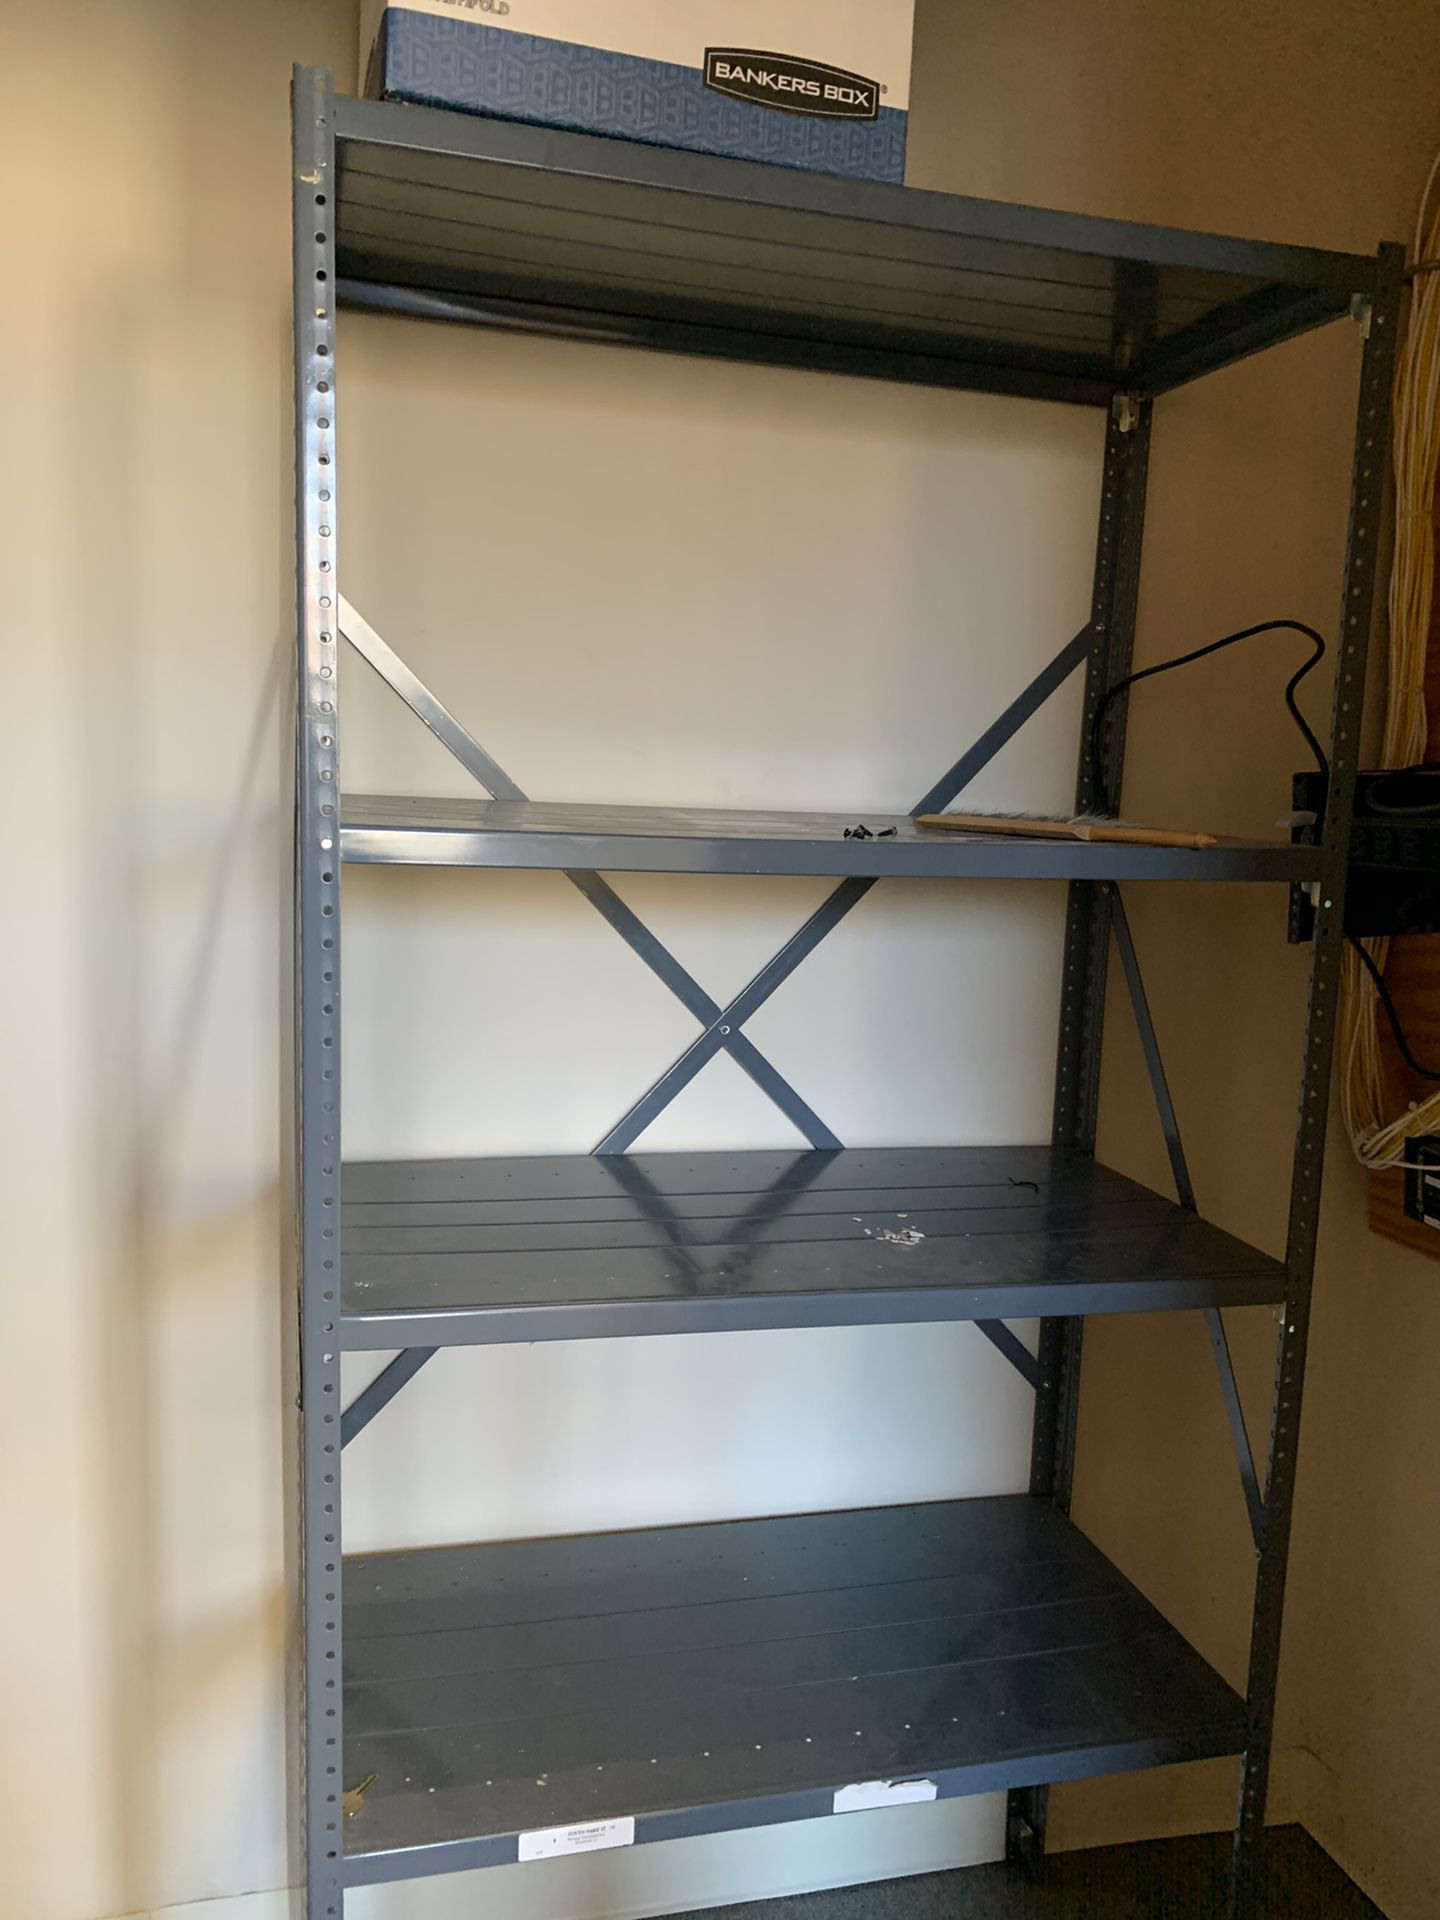 Very Functional Metal Shelf. Comes with five shelves.